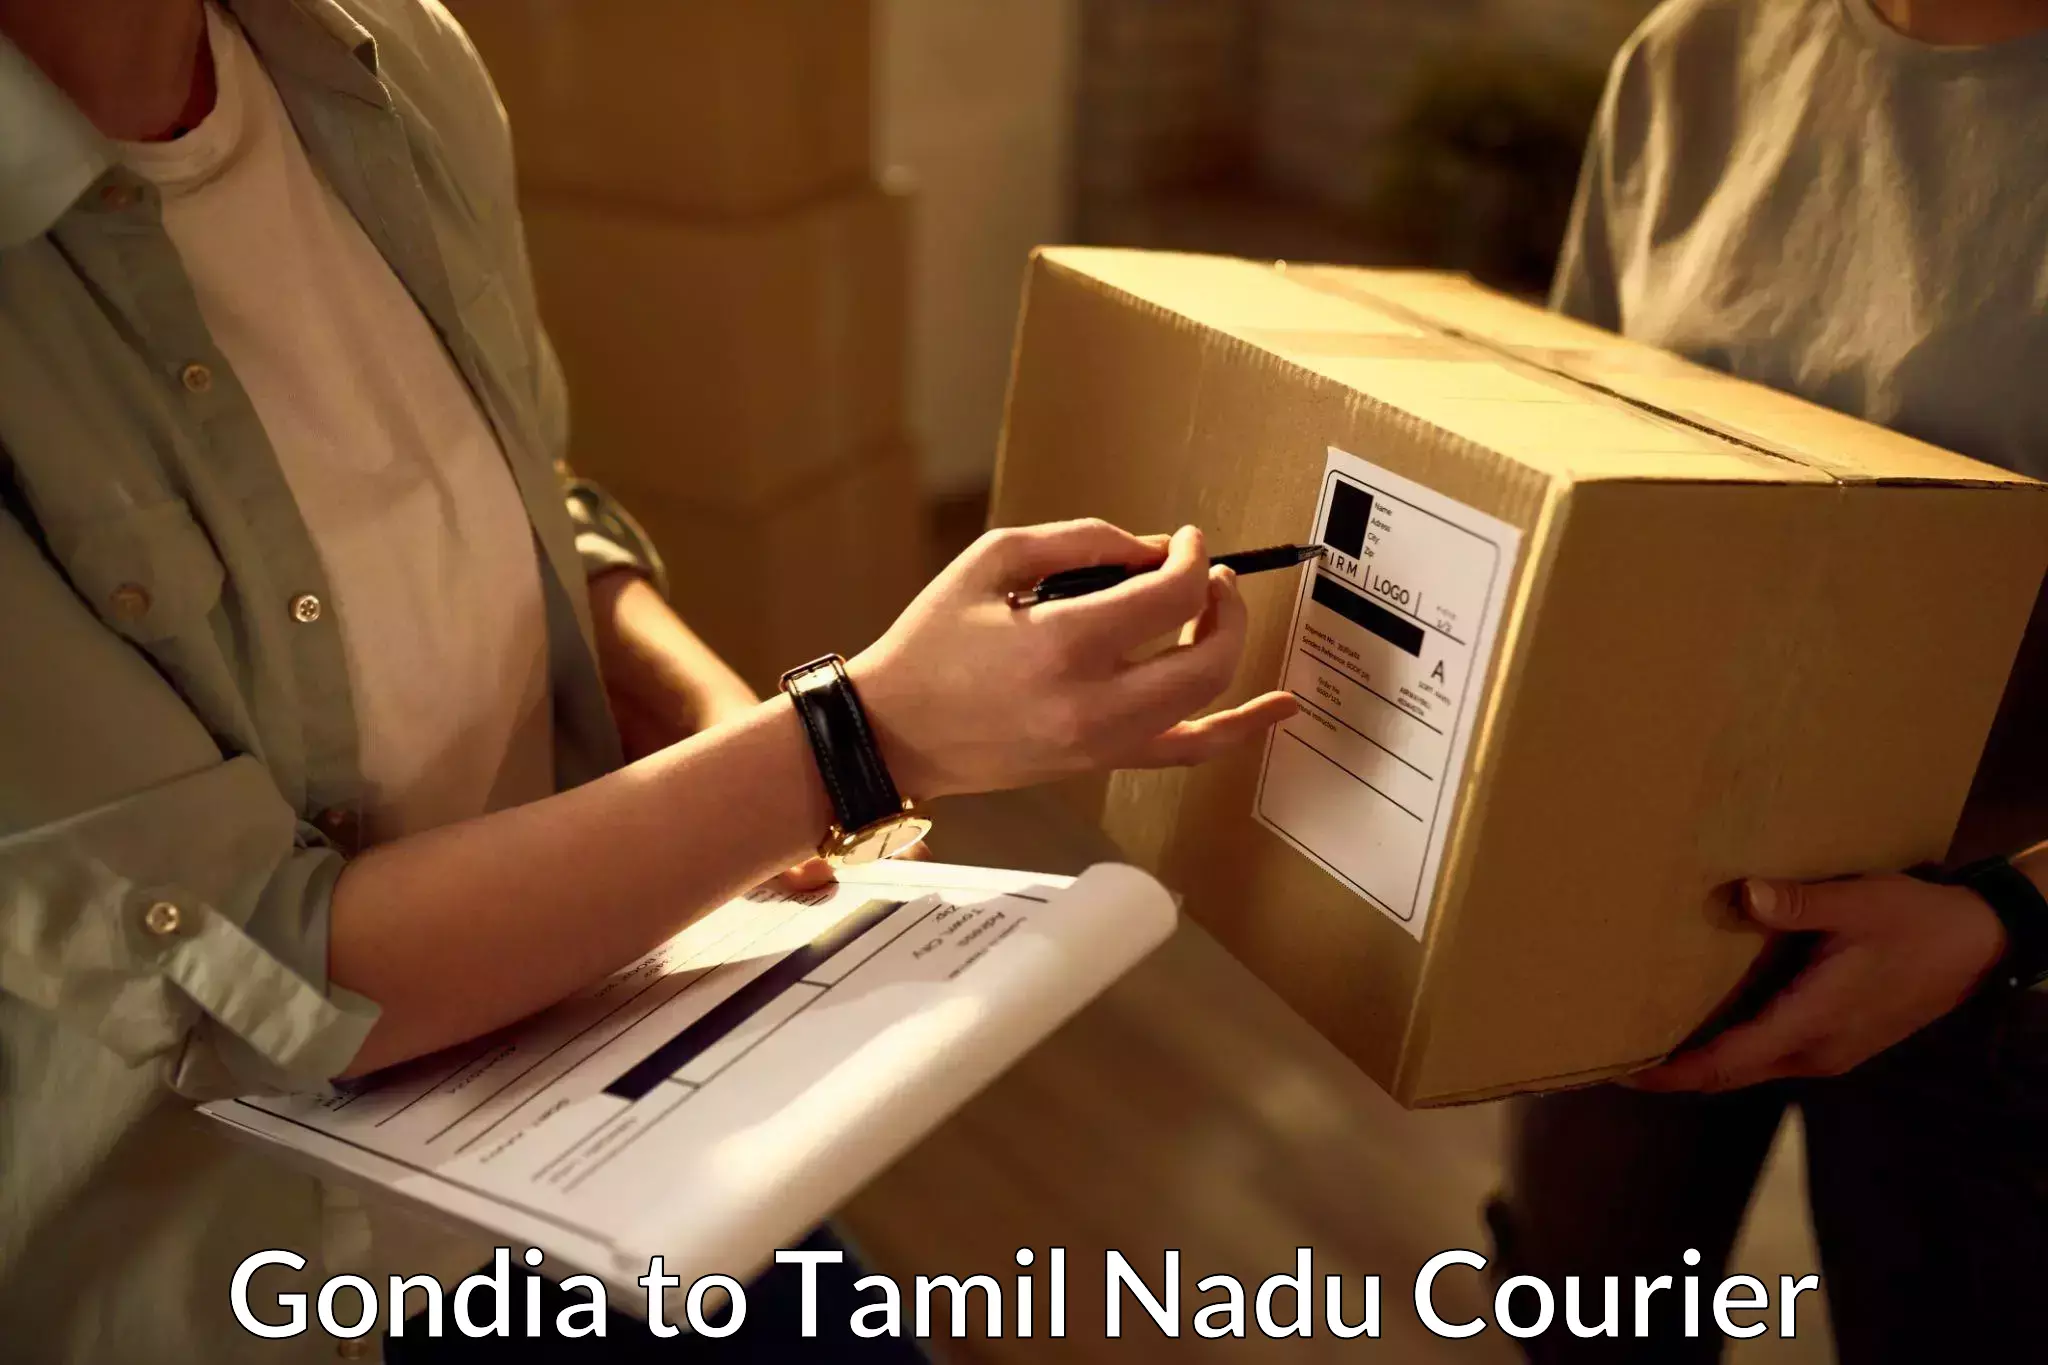 Personal courier services Gondia to Sriperumbudur